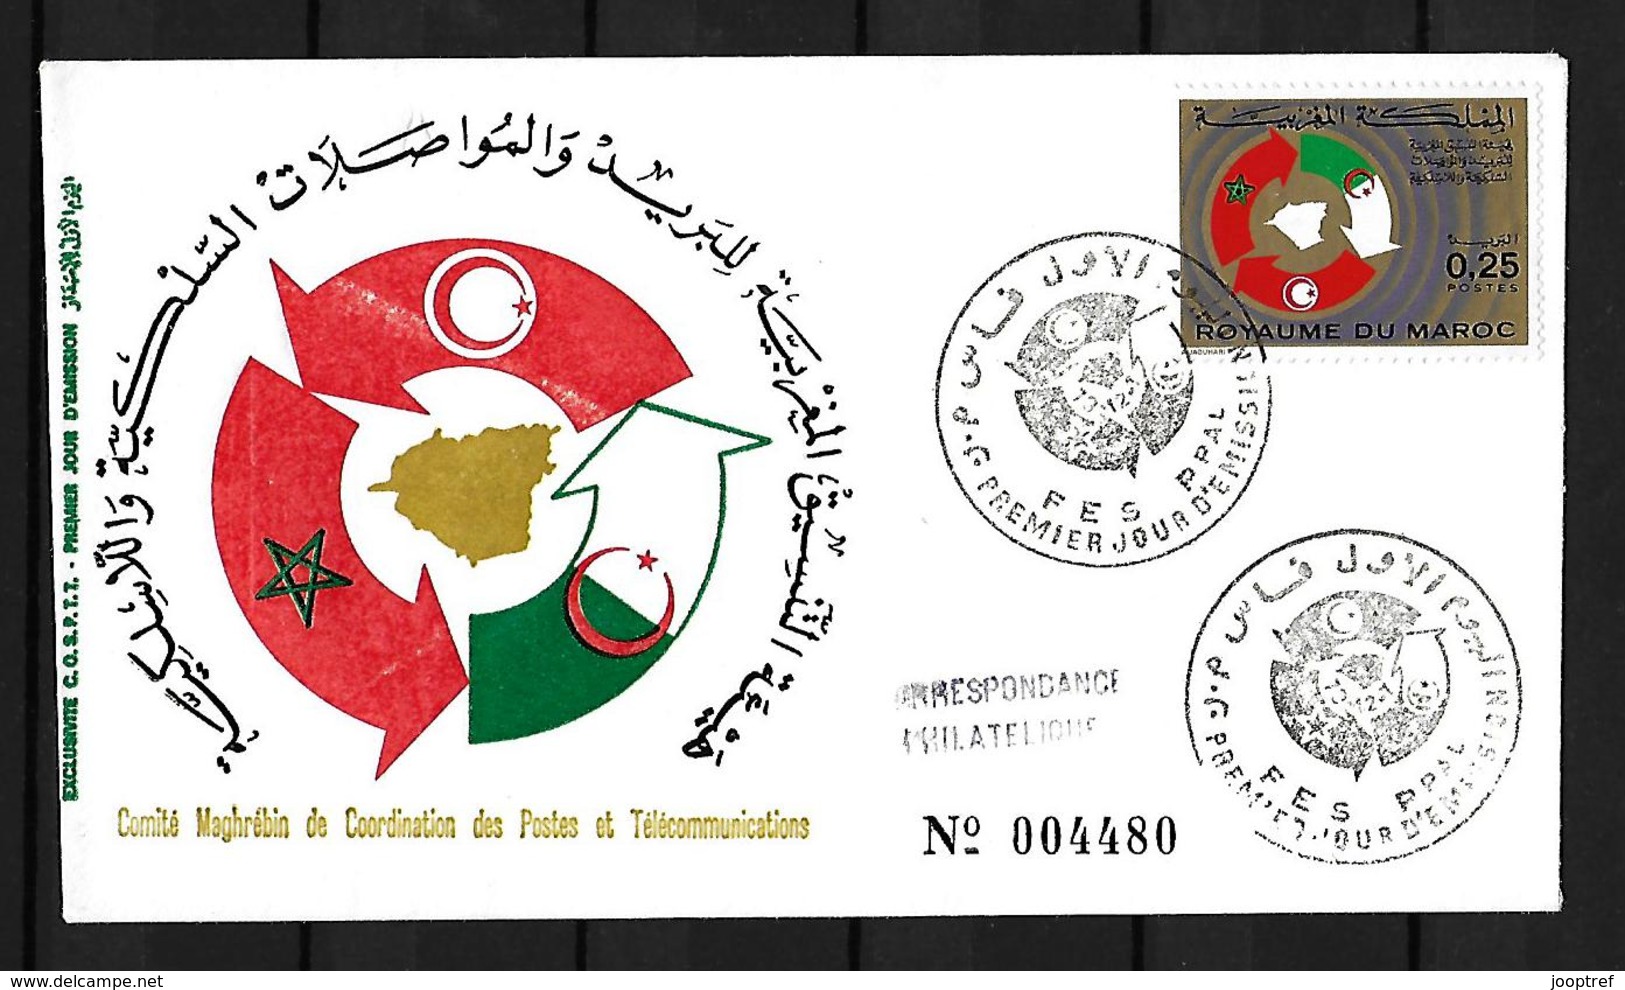 1973 Joint/Commune Algeria And Morocco, FDC MOROCCO: Maghreb Committee Coordination Post Telecommunications - Emissions Communes